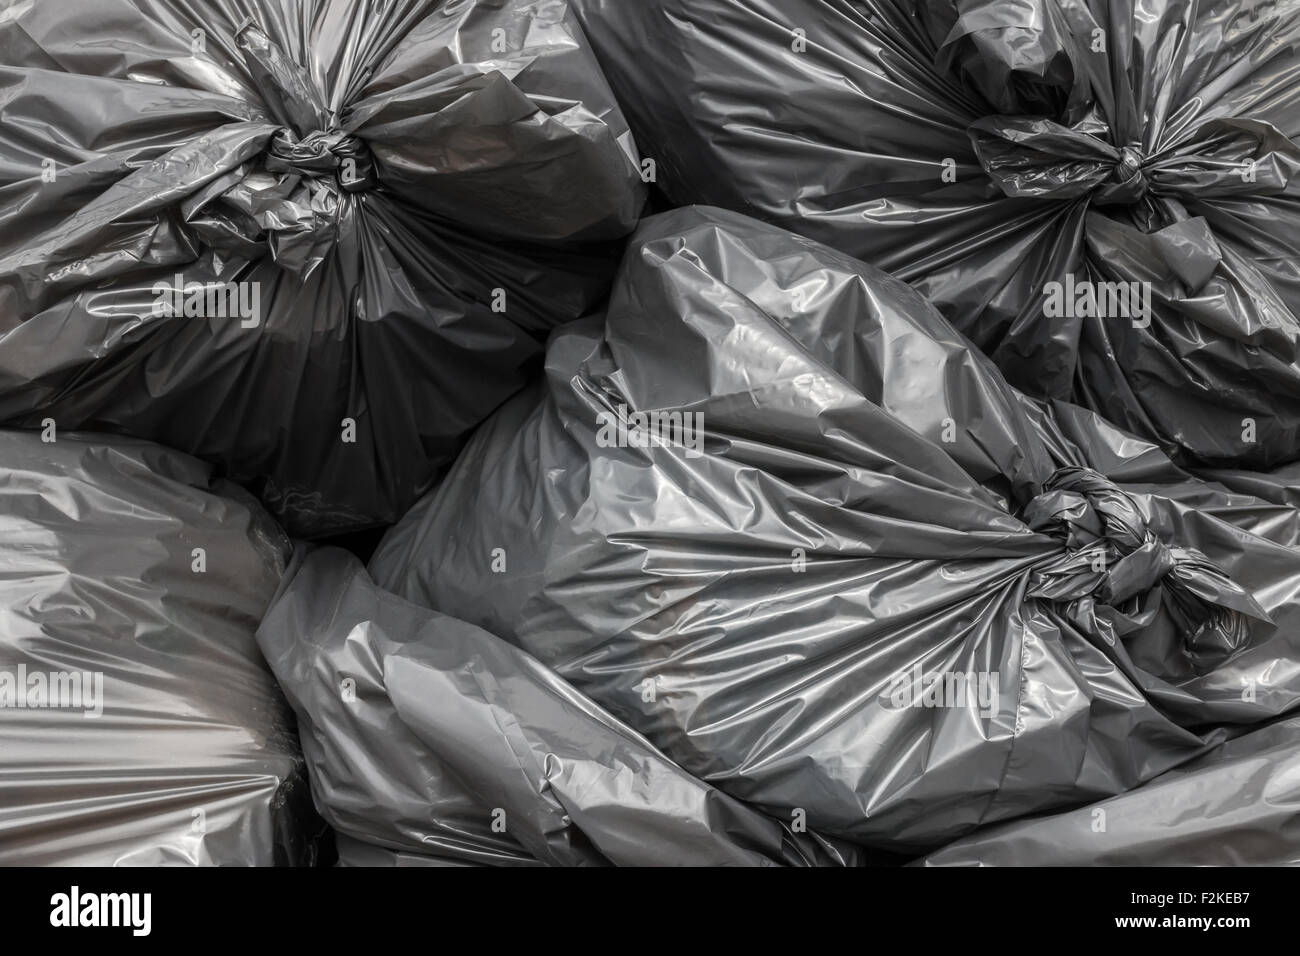 Garbage bags blacks stacked and ready to be picked Stock Photo - Alamy